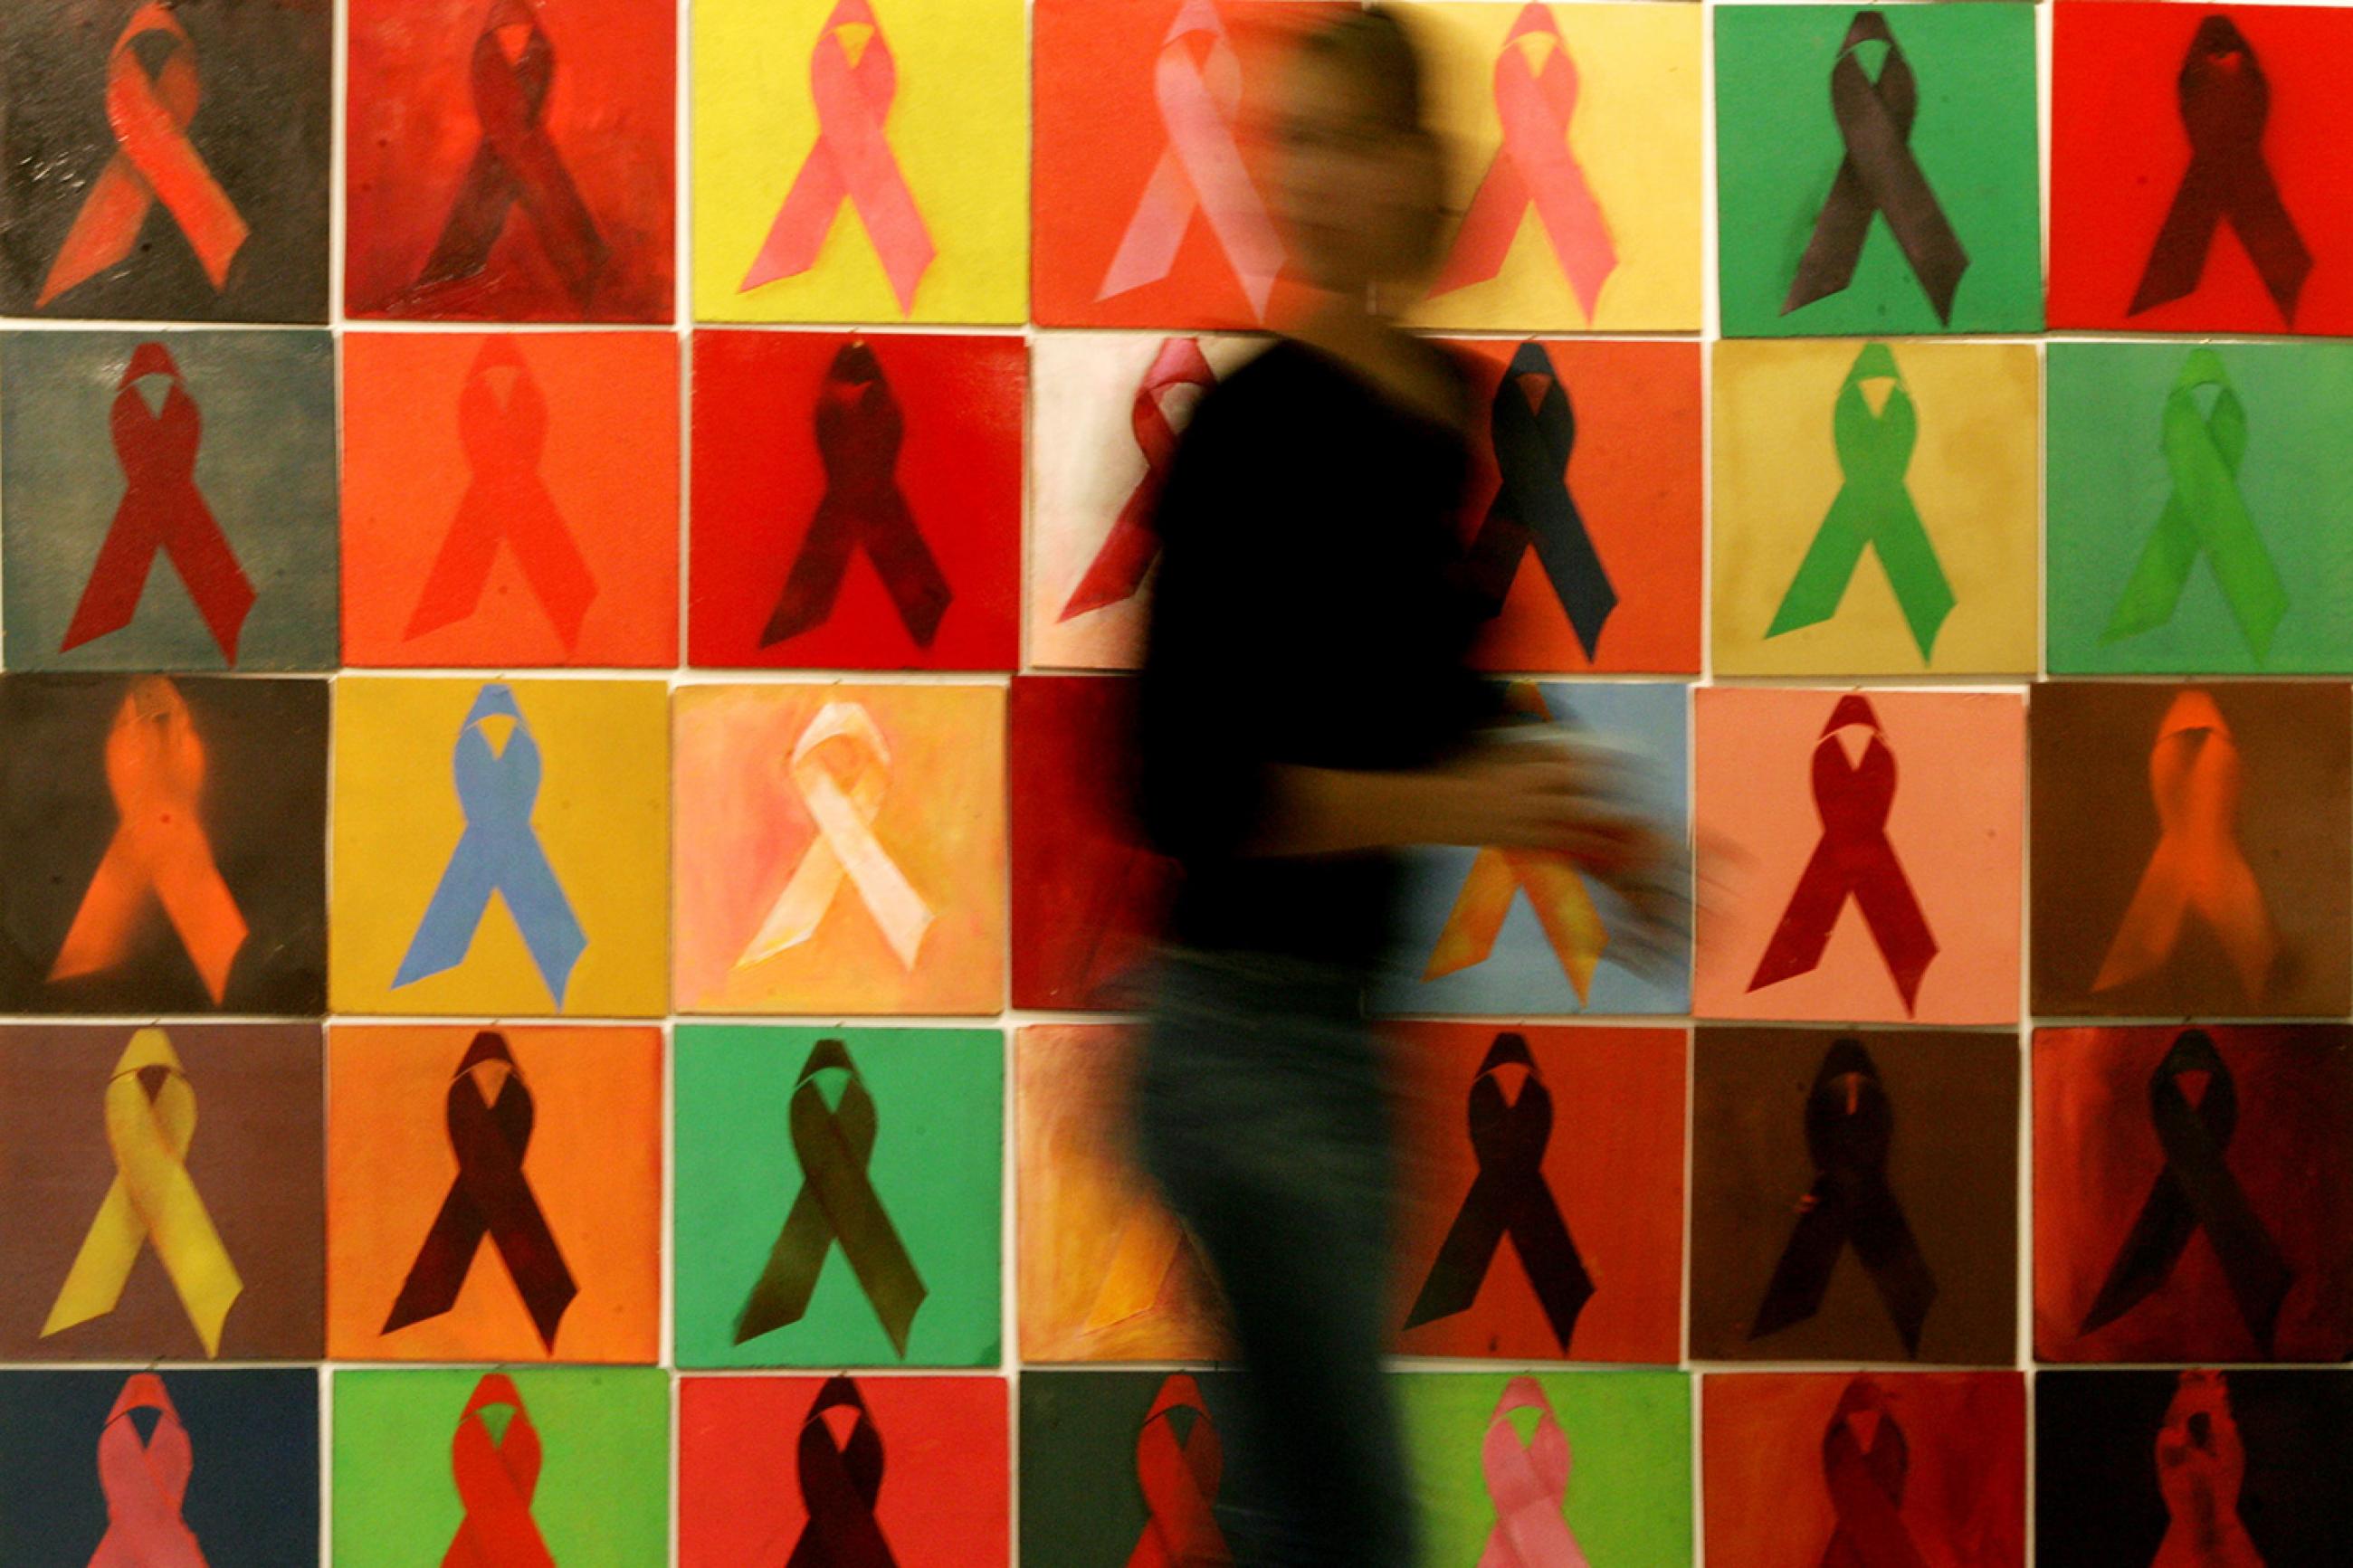 A woman walks past an artwork by Athina Robie depicting Aids awareness ribbons at an exhibition inside Athens, Greece, Syntagma metro station marking World Aids Day on December 1, 2005. The photo shows a blurred figure walking past a mural with lots of multi-colored AIDS ribbons, reminiscent of an Andy Warhol. REUTERS/Yiorgos Karahalis